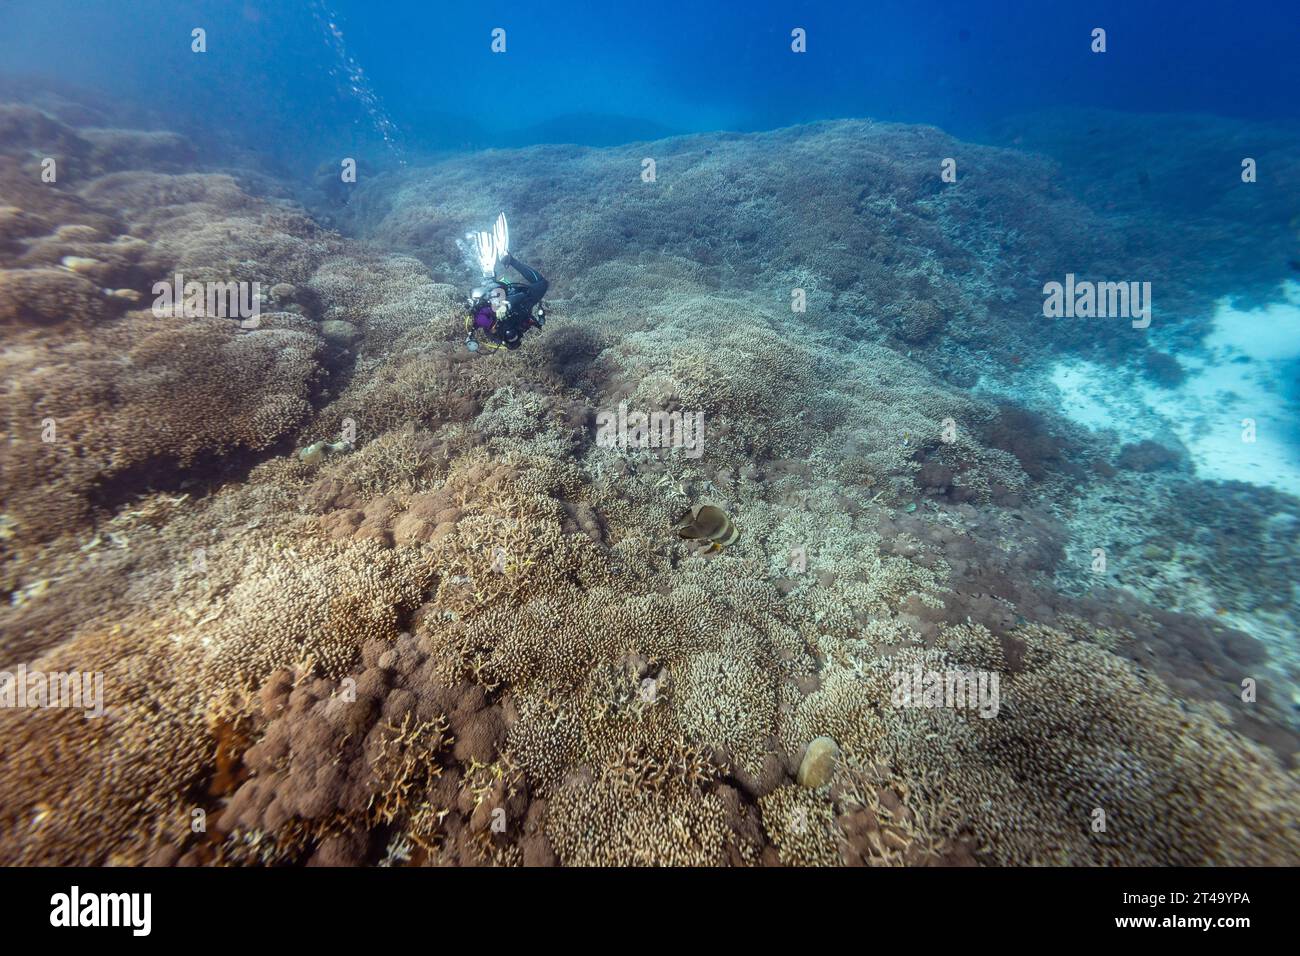 Scuba diver photographs an expanse of staghorn coral while diving in the tropical blue waters above a vast coral reef landscape Stock Photo